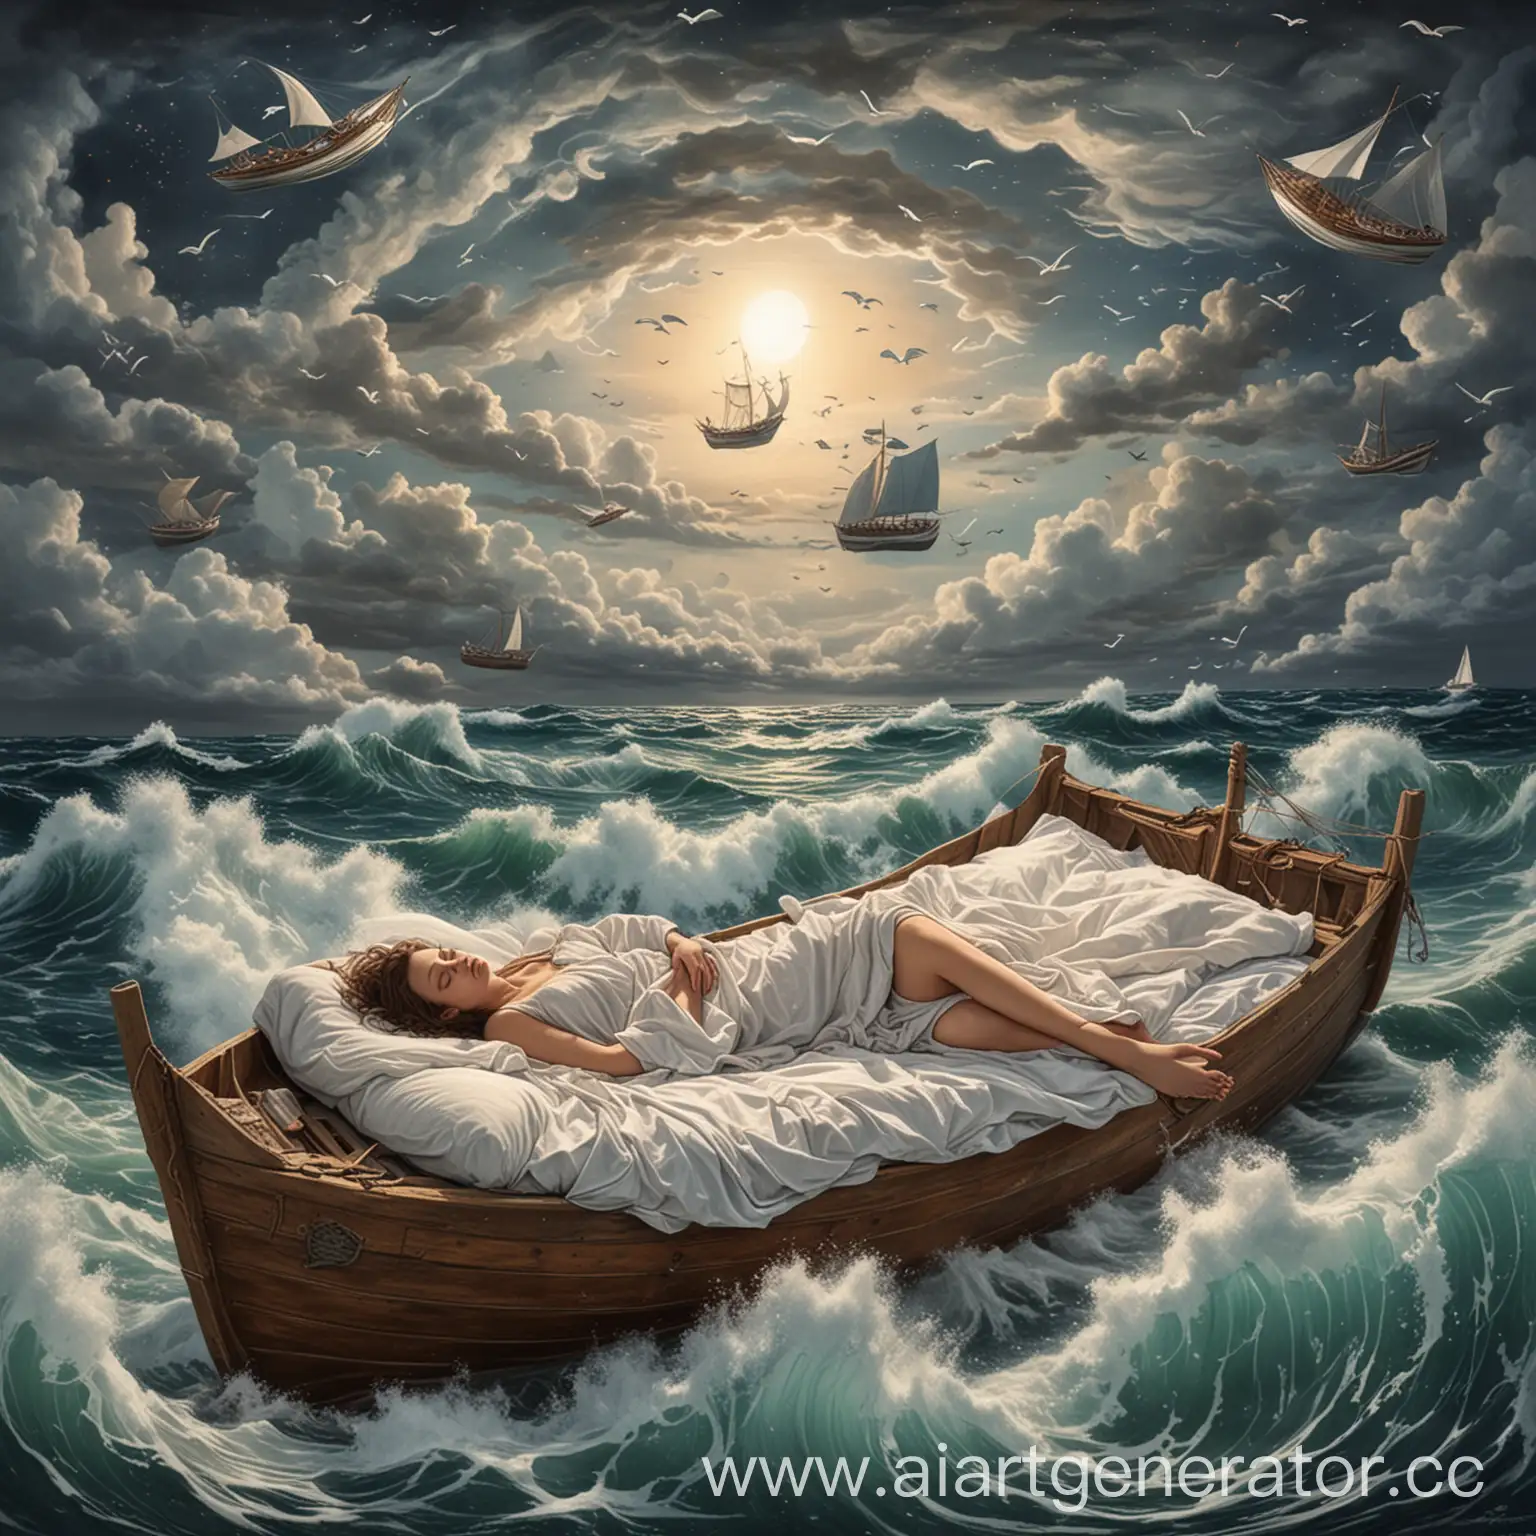 Dreamy-Woman-Sleeping-on-a-Floating-Bed-Surrounded-by-Ocean-Waves-and-Boats